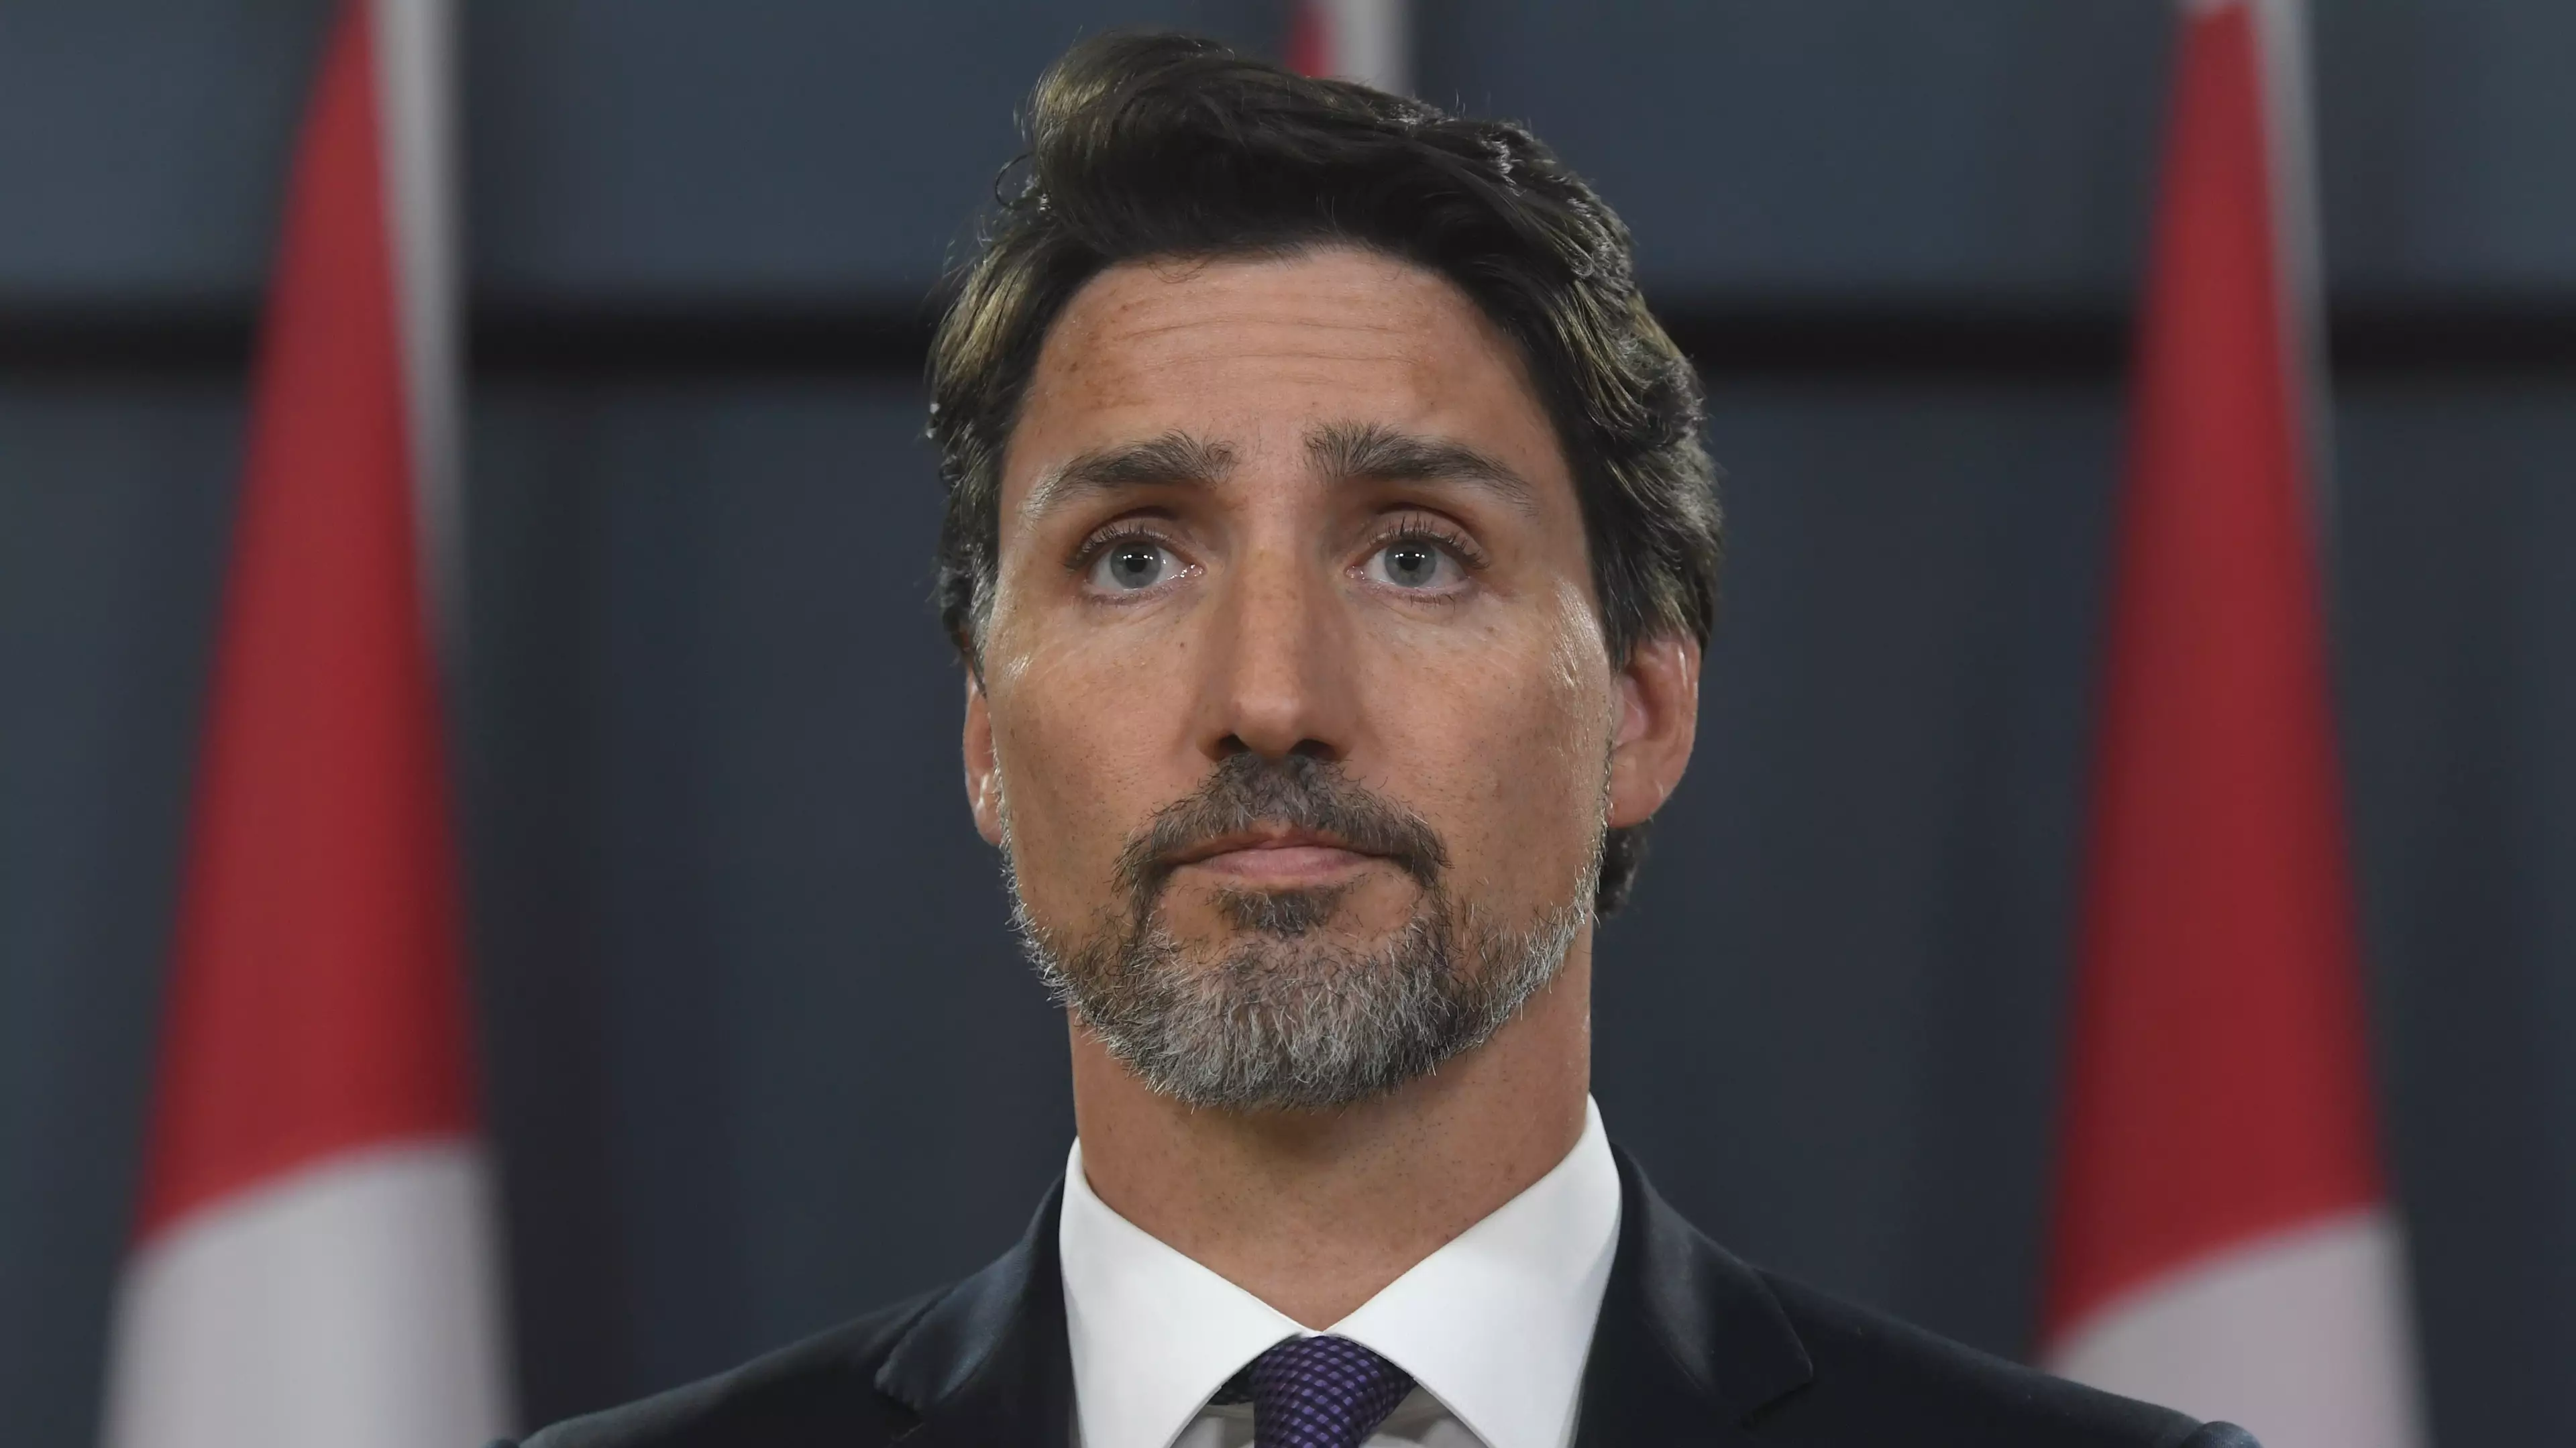 Canadian Prime Minister Has 'Evidence' The Ukrainian Plane Was Shot Down By Missile